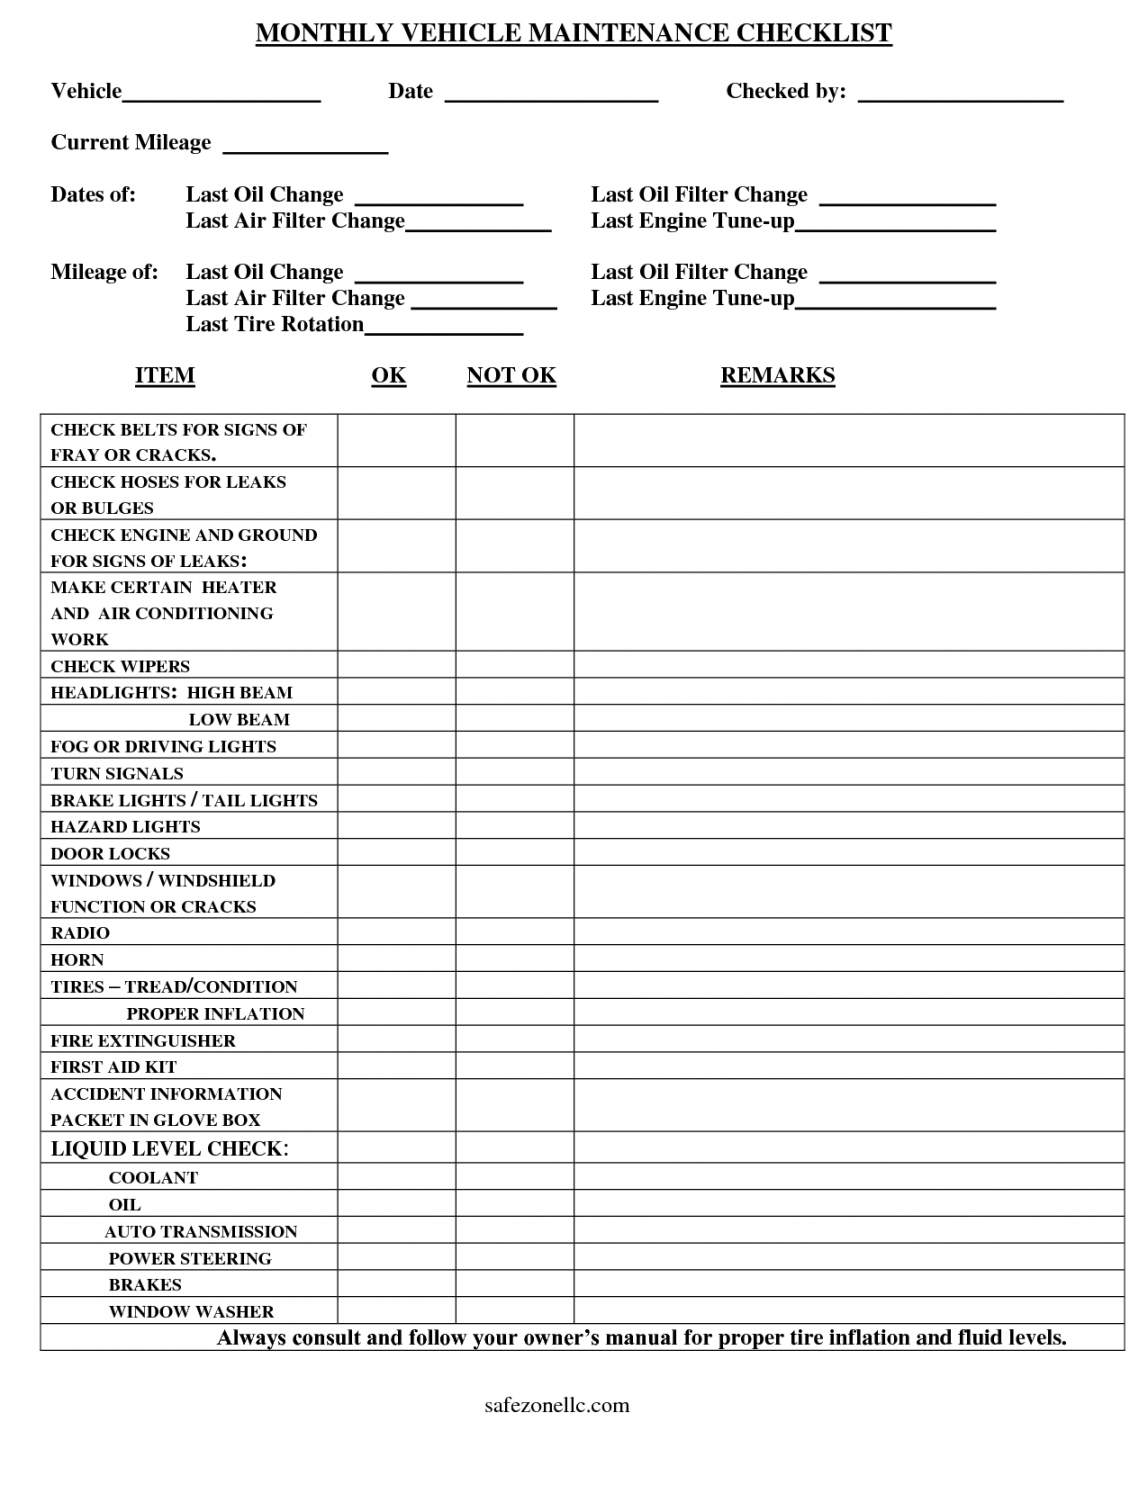 Monthly Inspection Checklist Template With Regard To Vehicle Checklist Template Word